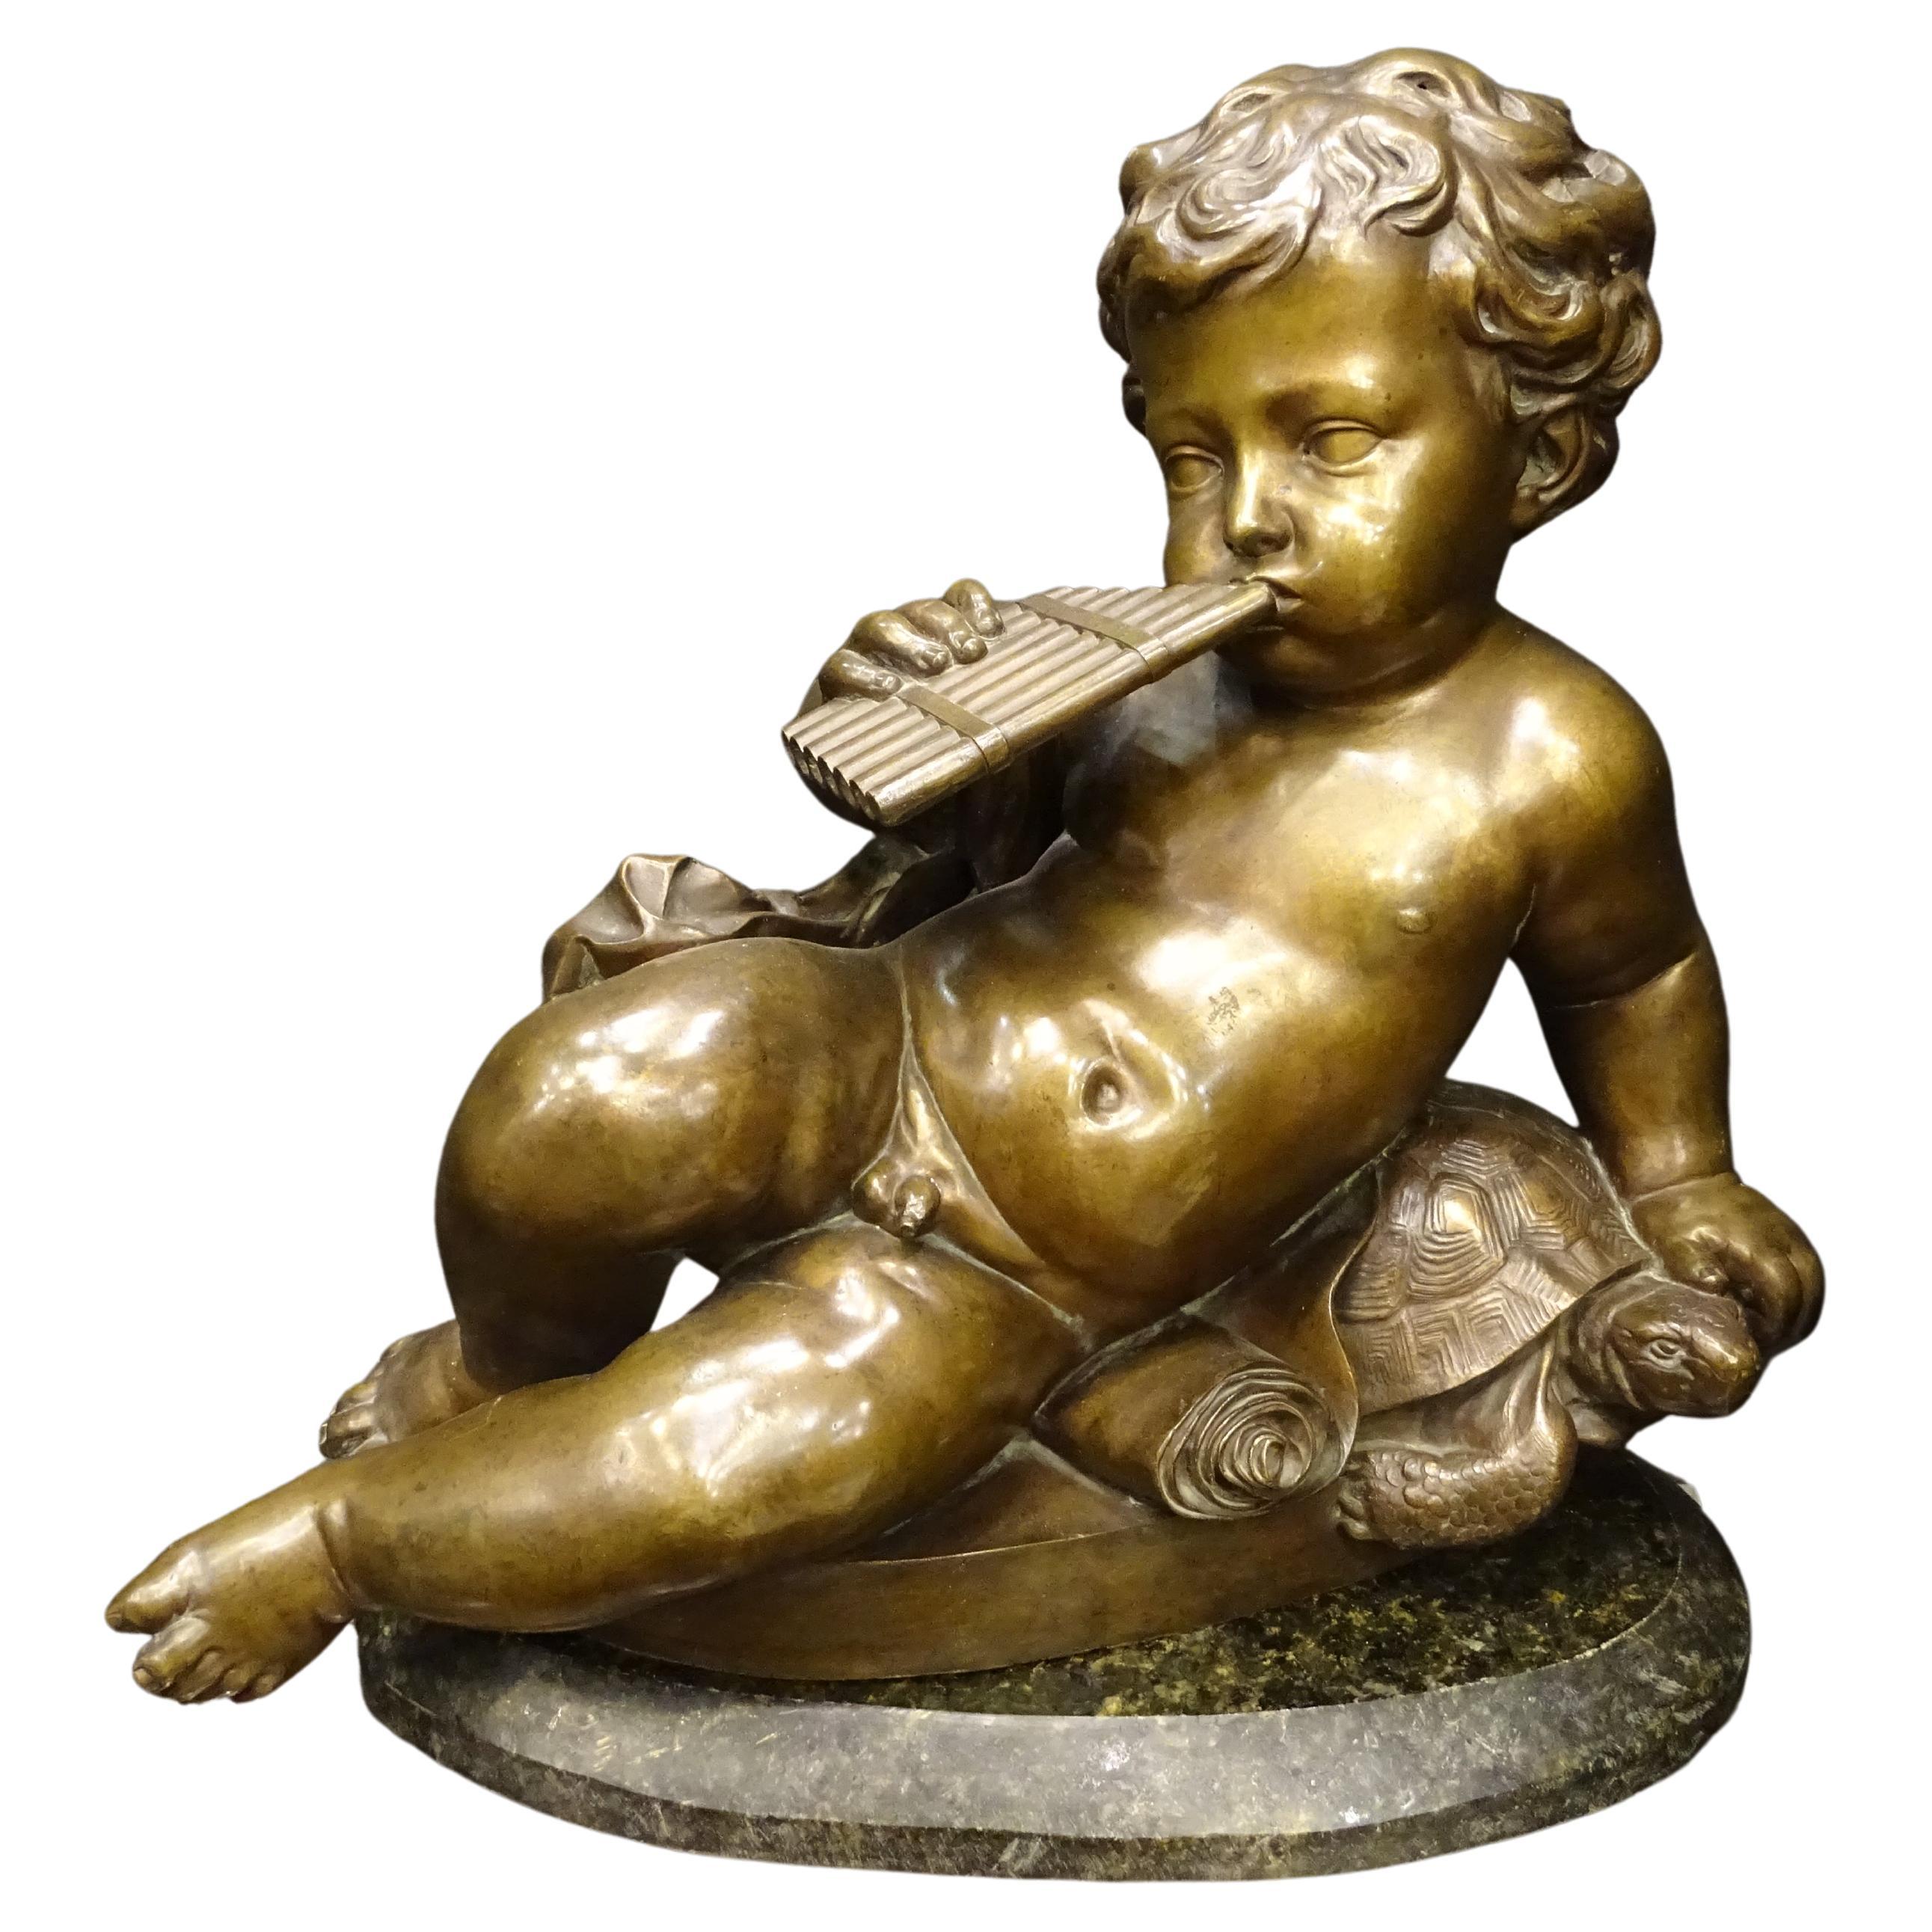 19th Century French Sculpture Bronze, Putti with Turttle